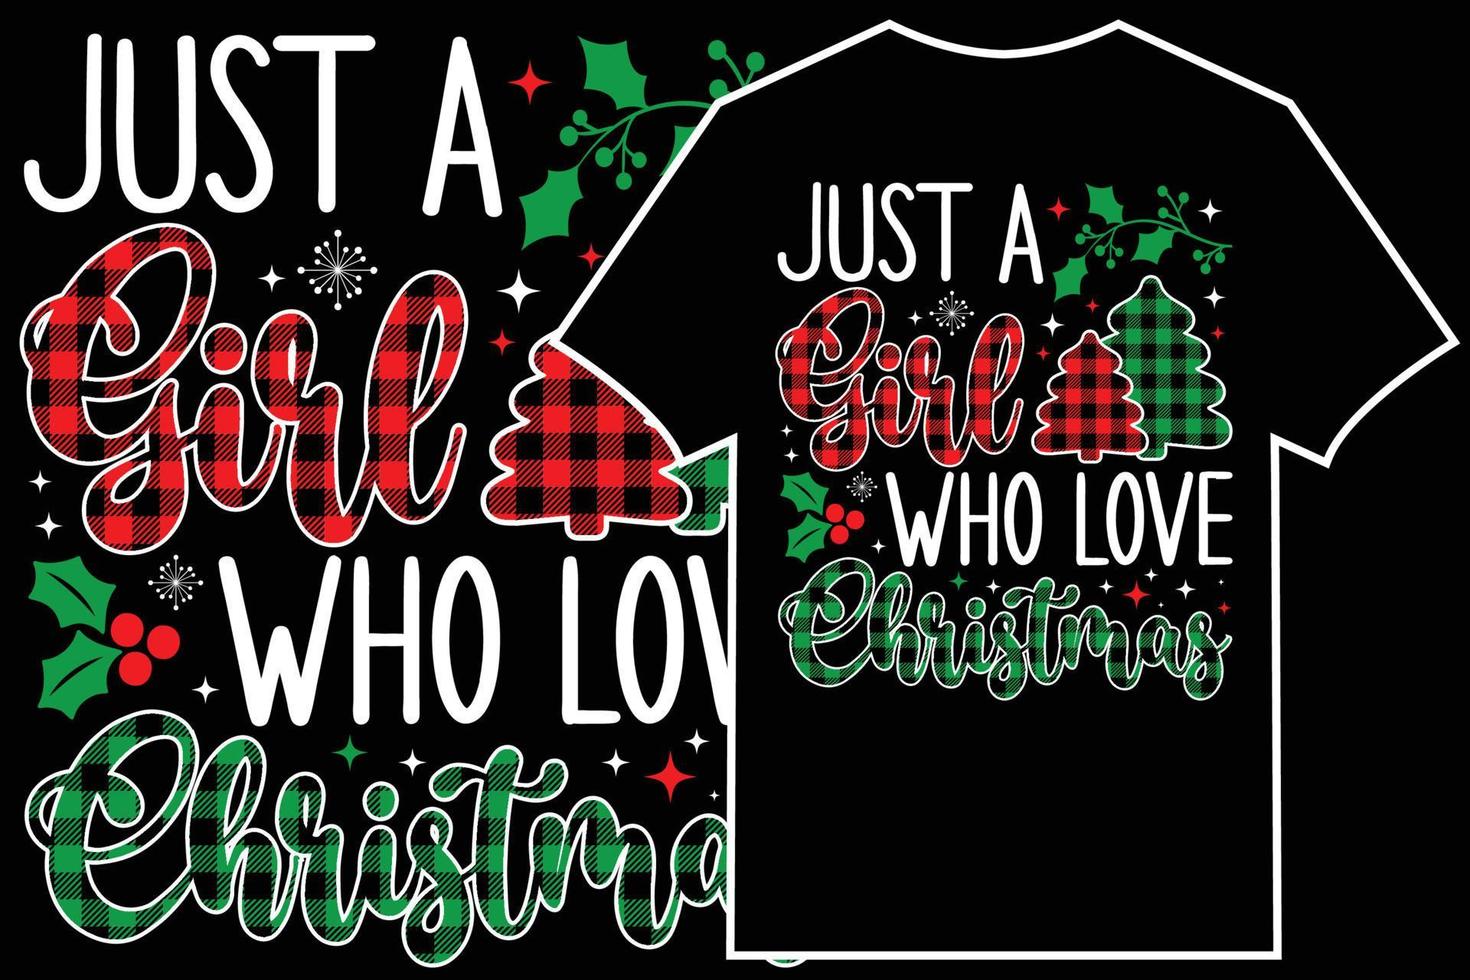 Christmas Typographic T-shirt Design Vector. Just a girl who Loves Christmas vector